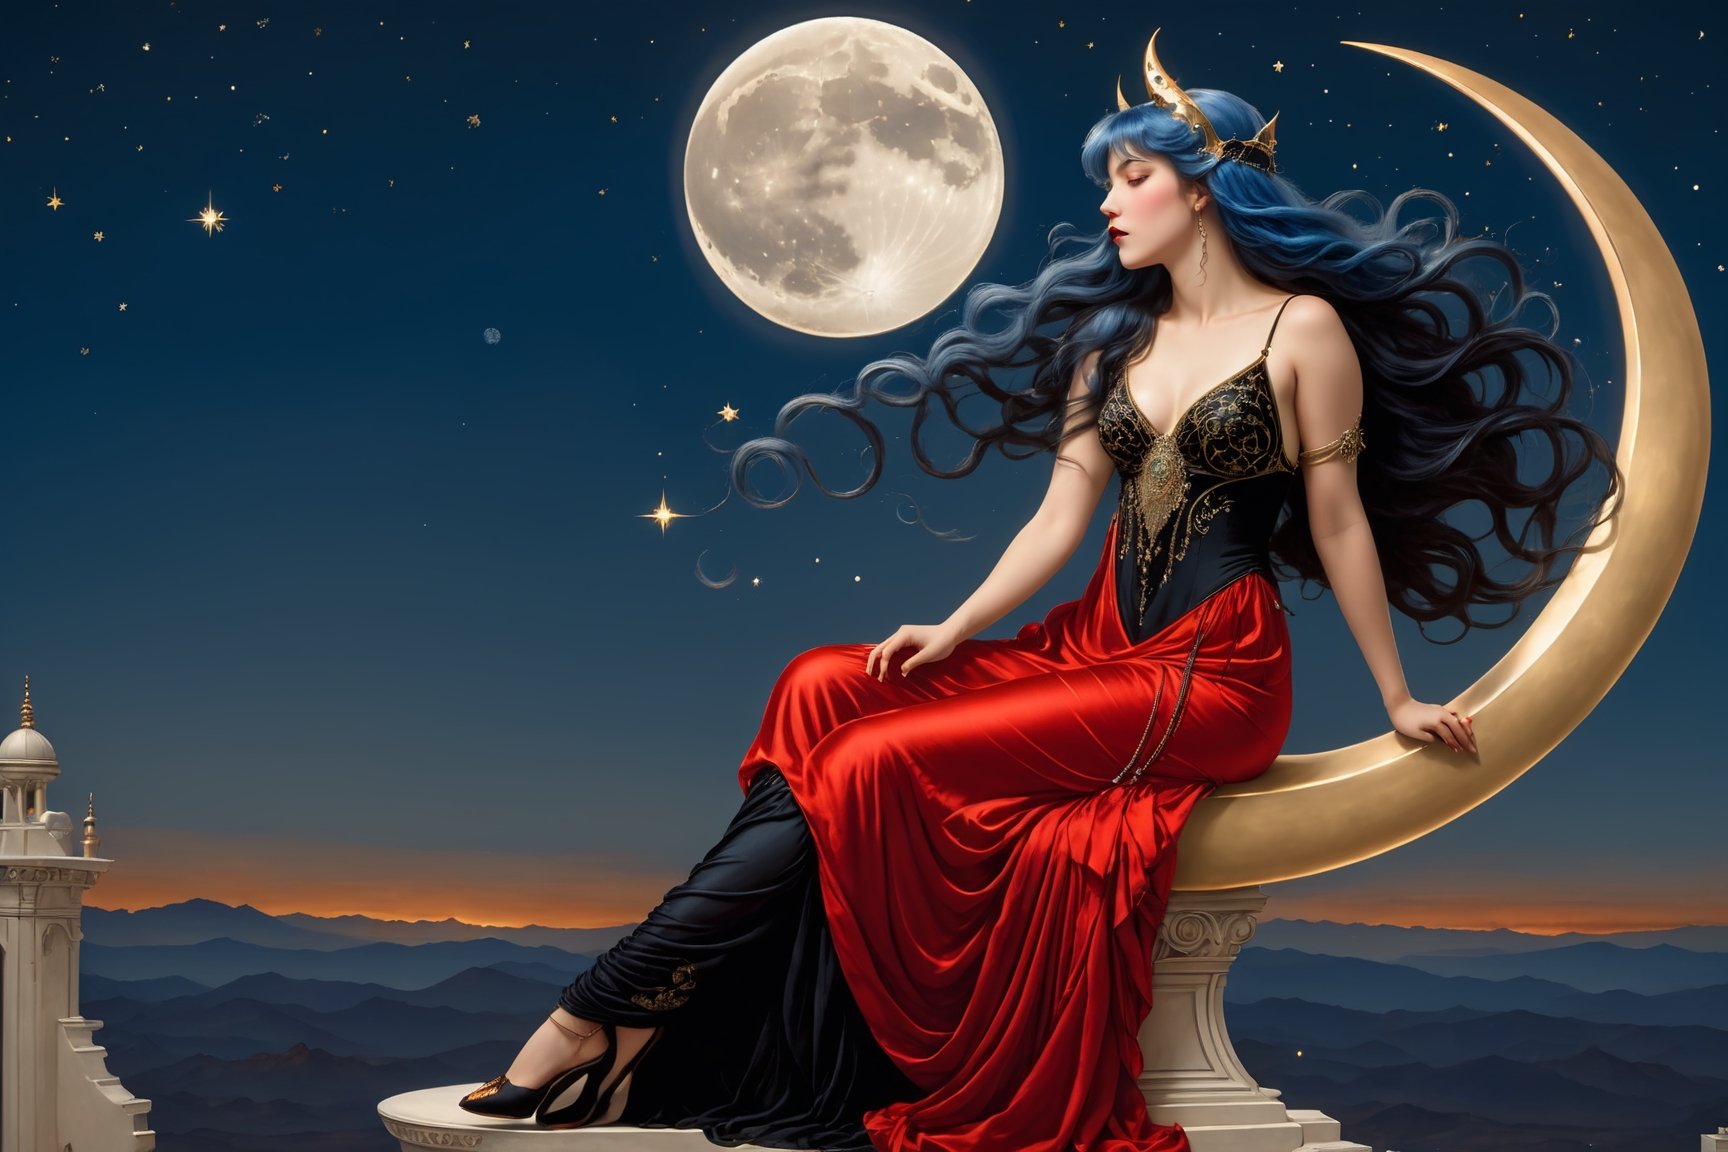 side view. full body shot, extreme long shot,  michael parkes style, pre-raphaelite, a beautiful young magical witch woman with long blue hair is sitting on a shiny golden crescent moon in the night sky. she is wearing an elaborate red silk gown with intricate black embroidery. a gargoyle is perched on the top of the moon. stars are in the sky. there are spheres and glowing orbs with etched intricate patterns floating in the sky,  michael parkes, artist study hands. ,1girl,Masterpiece